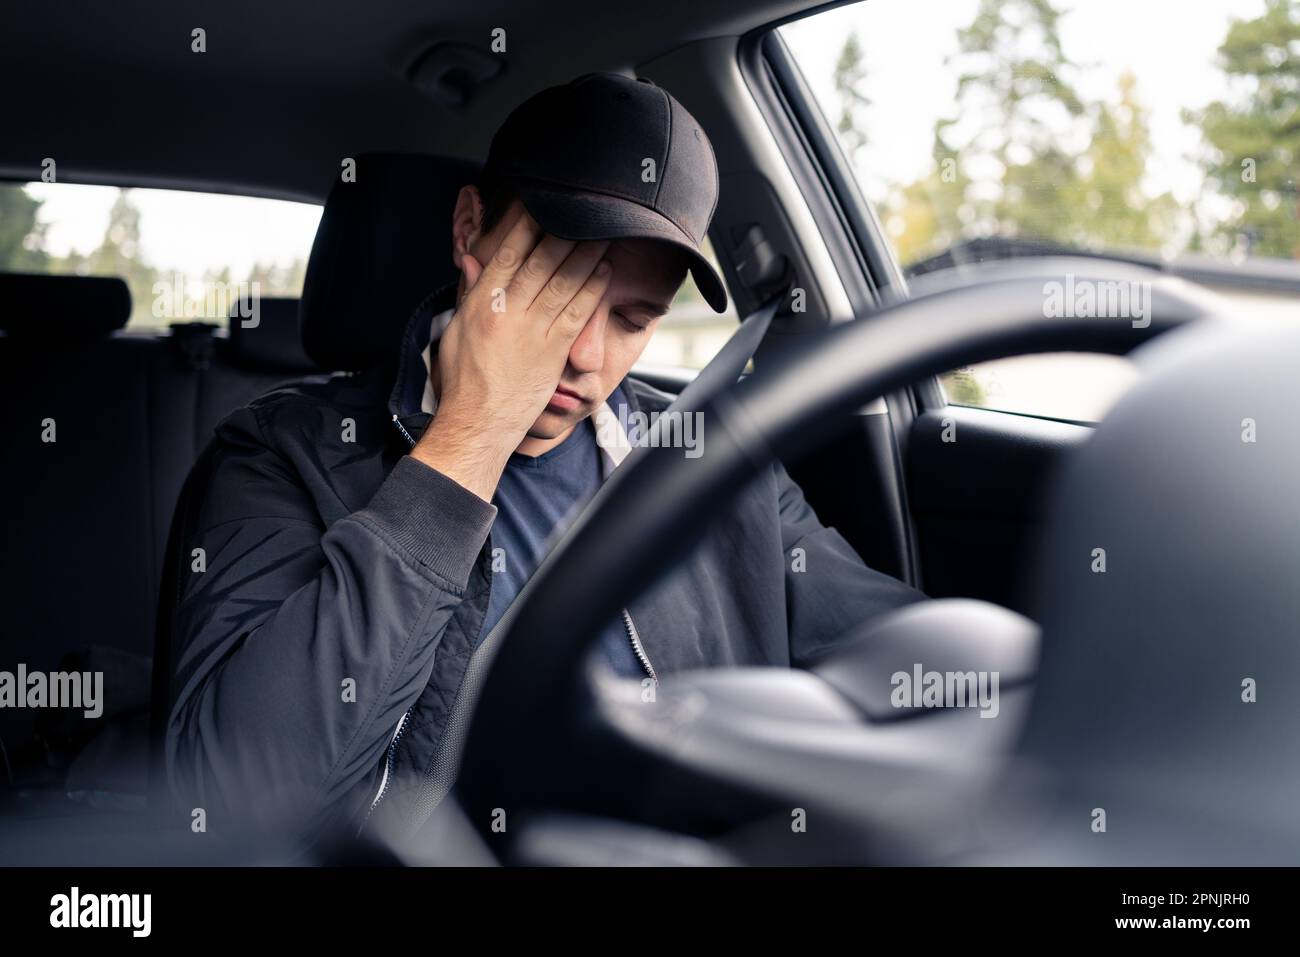 Tired man in car. Sleepy drowsy driver, fatigue. Driving and sleeping in vehicle. Exhausted, bored or drunk person. Serious upset man with stress. Stock Photo